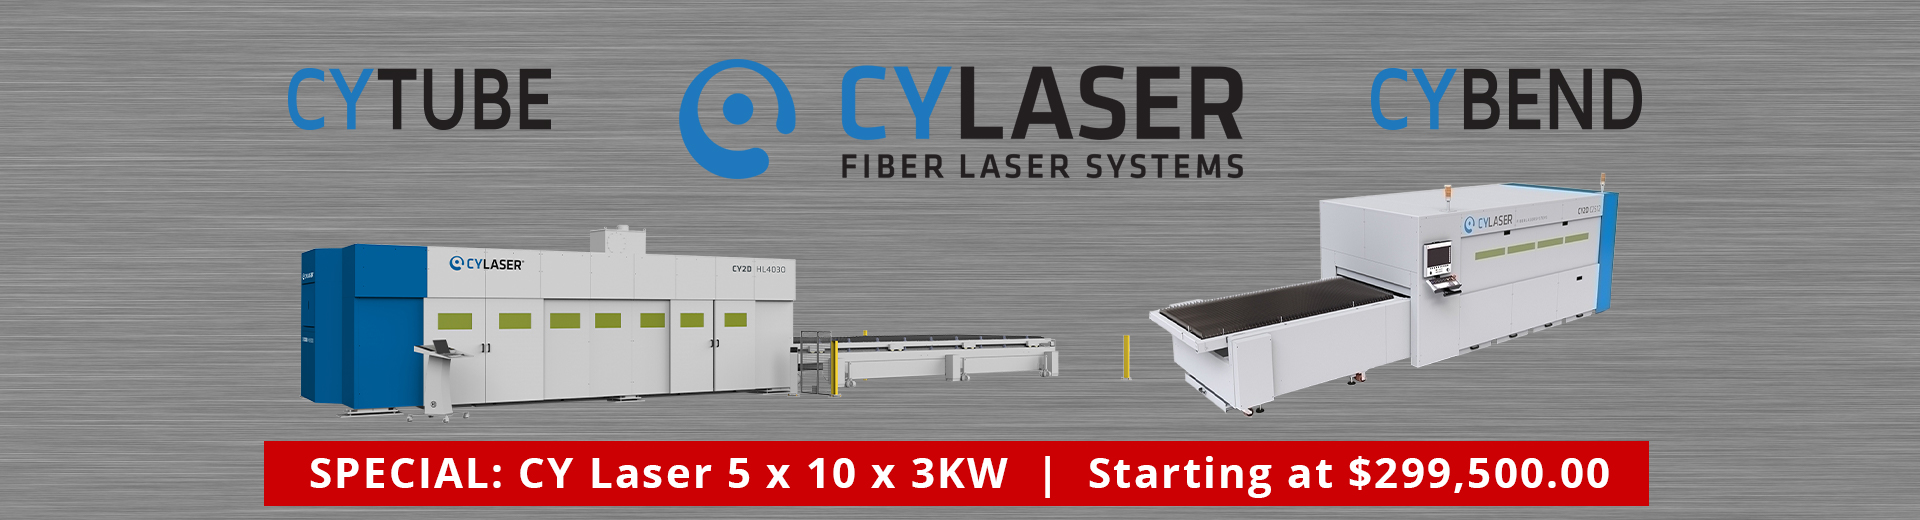 Cy Lasers Fiber Laser Systems